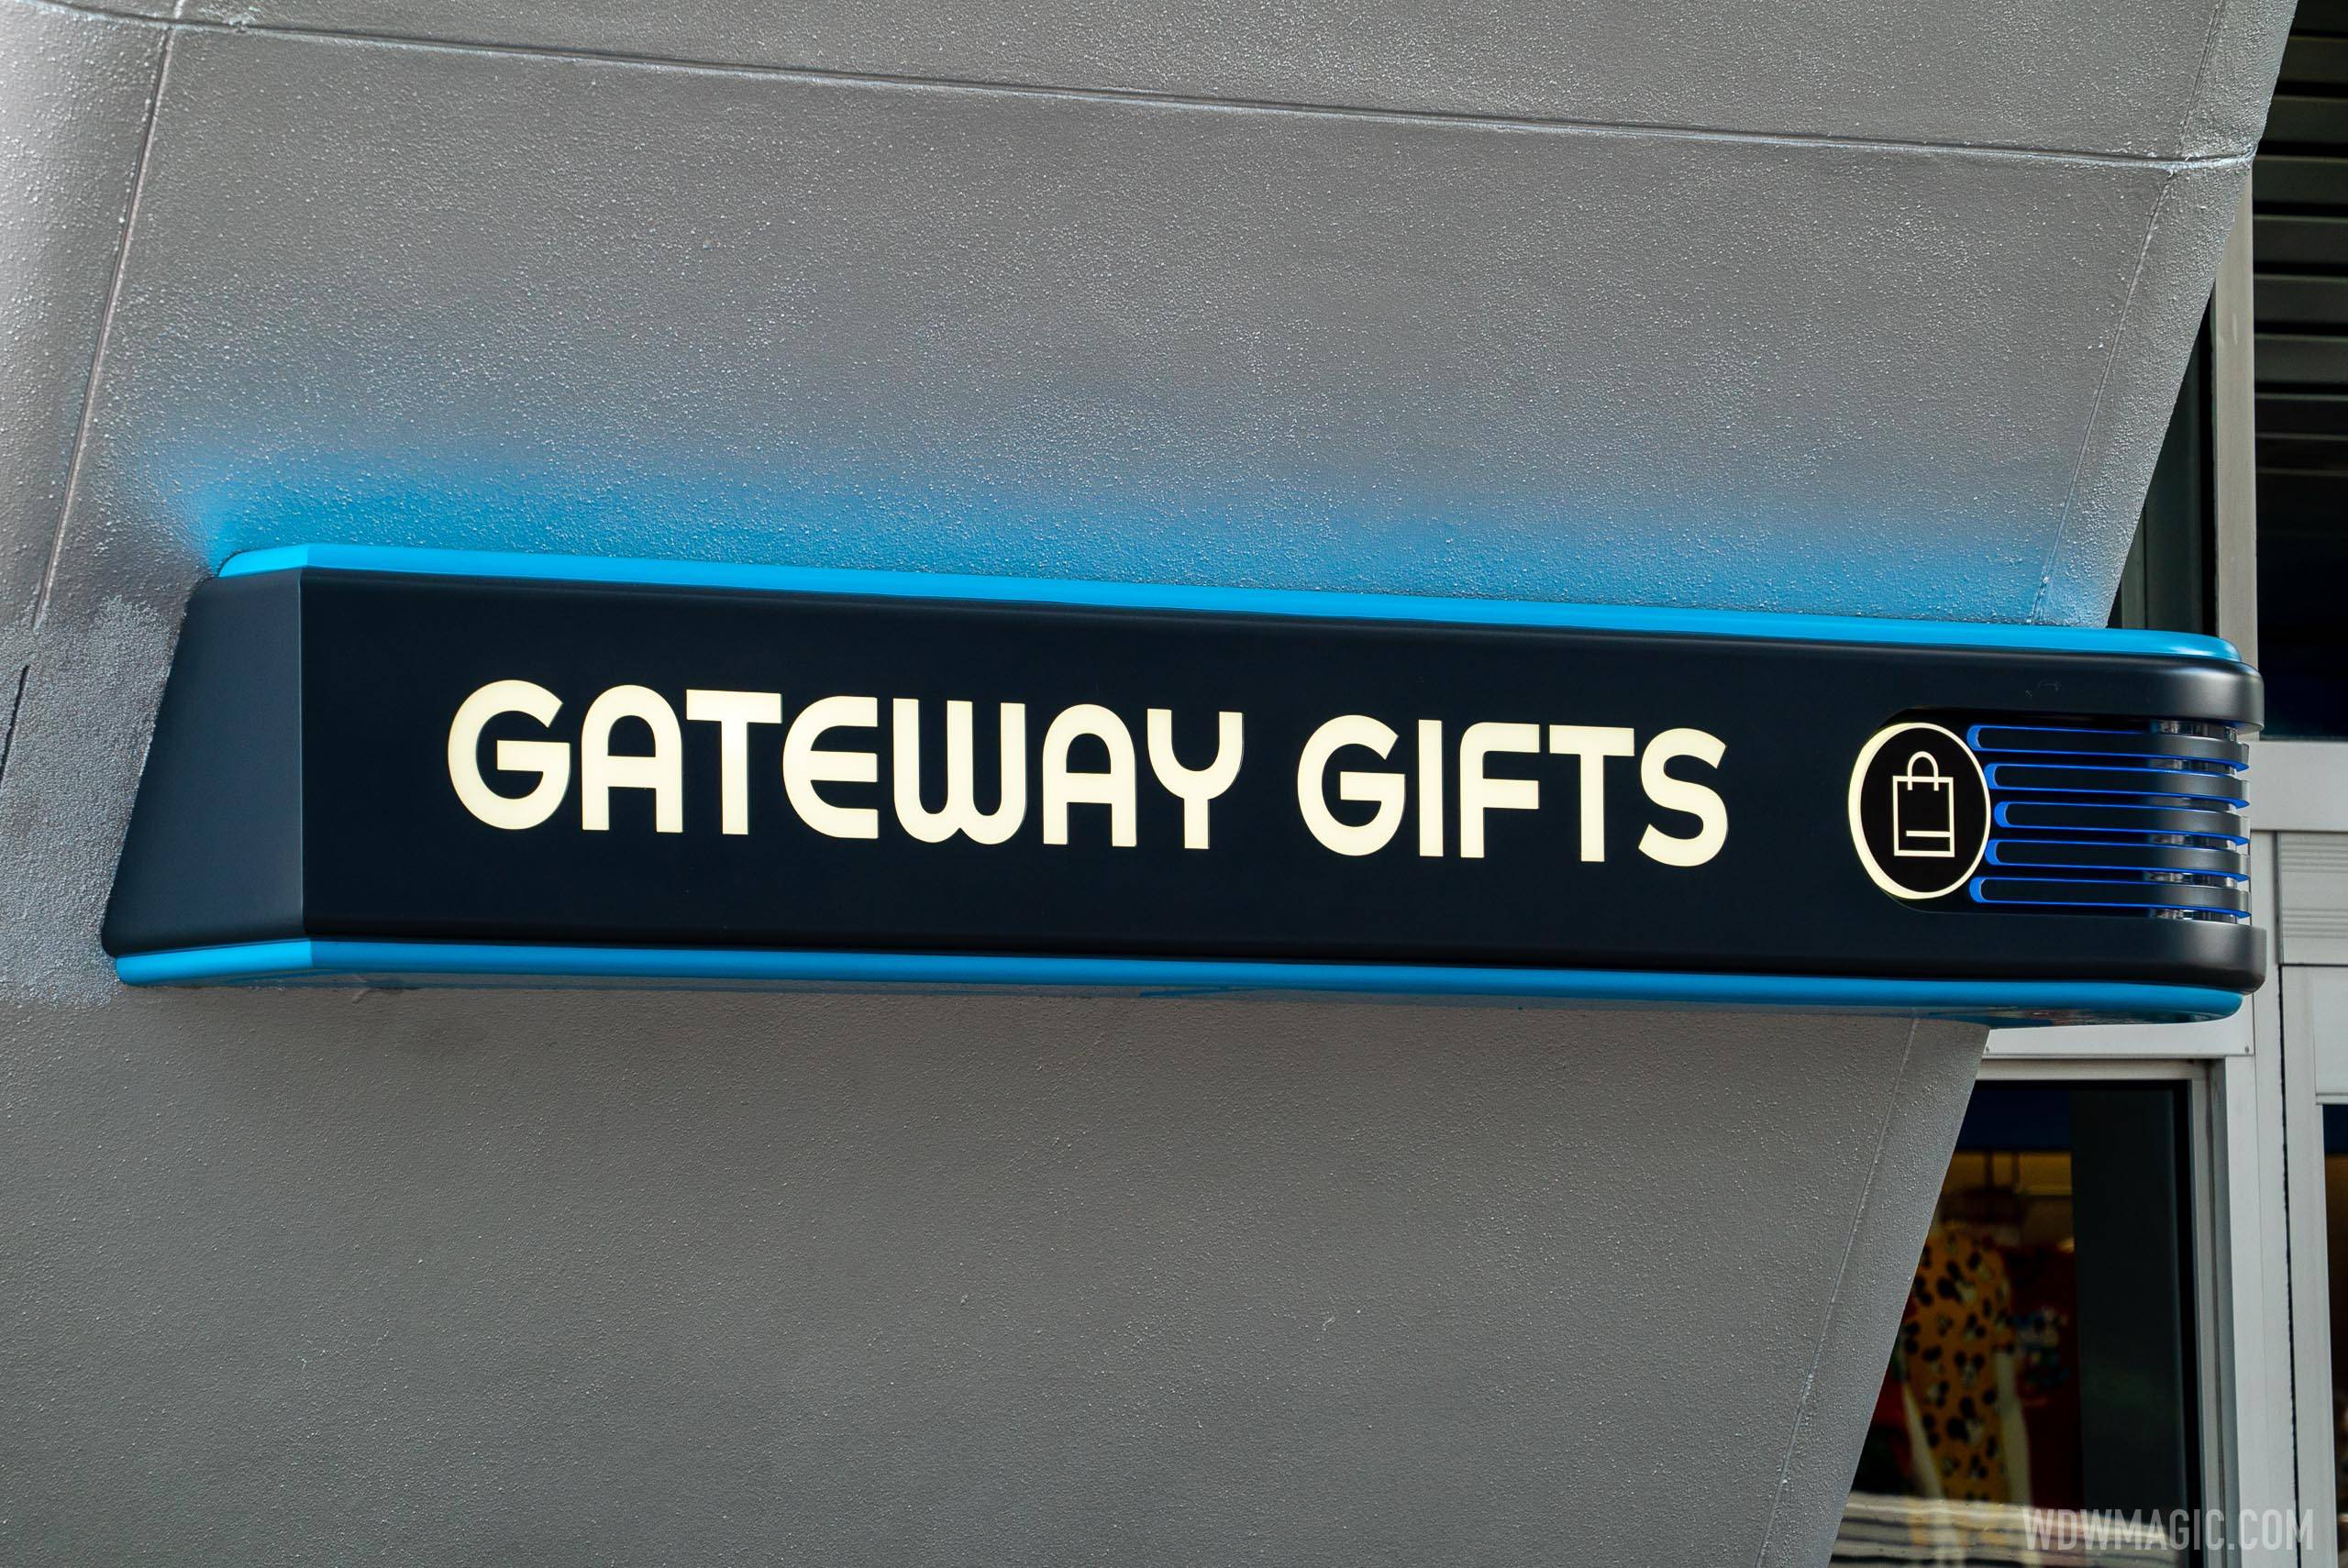 New signage at Gateway Gifts